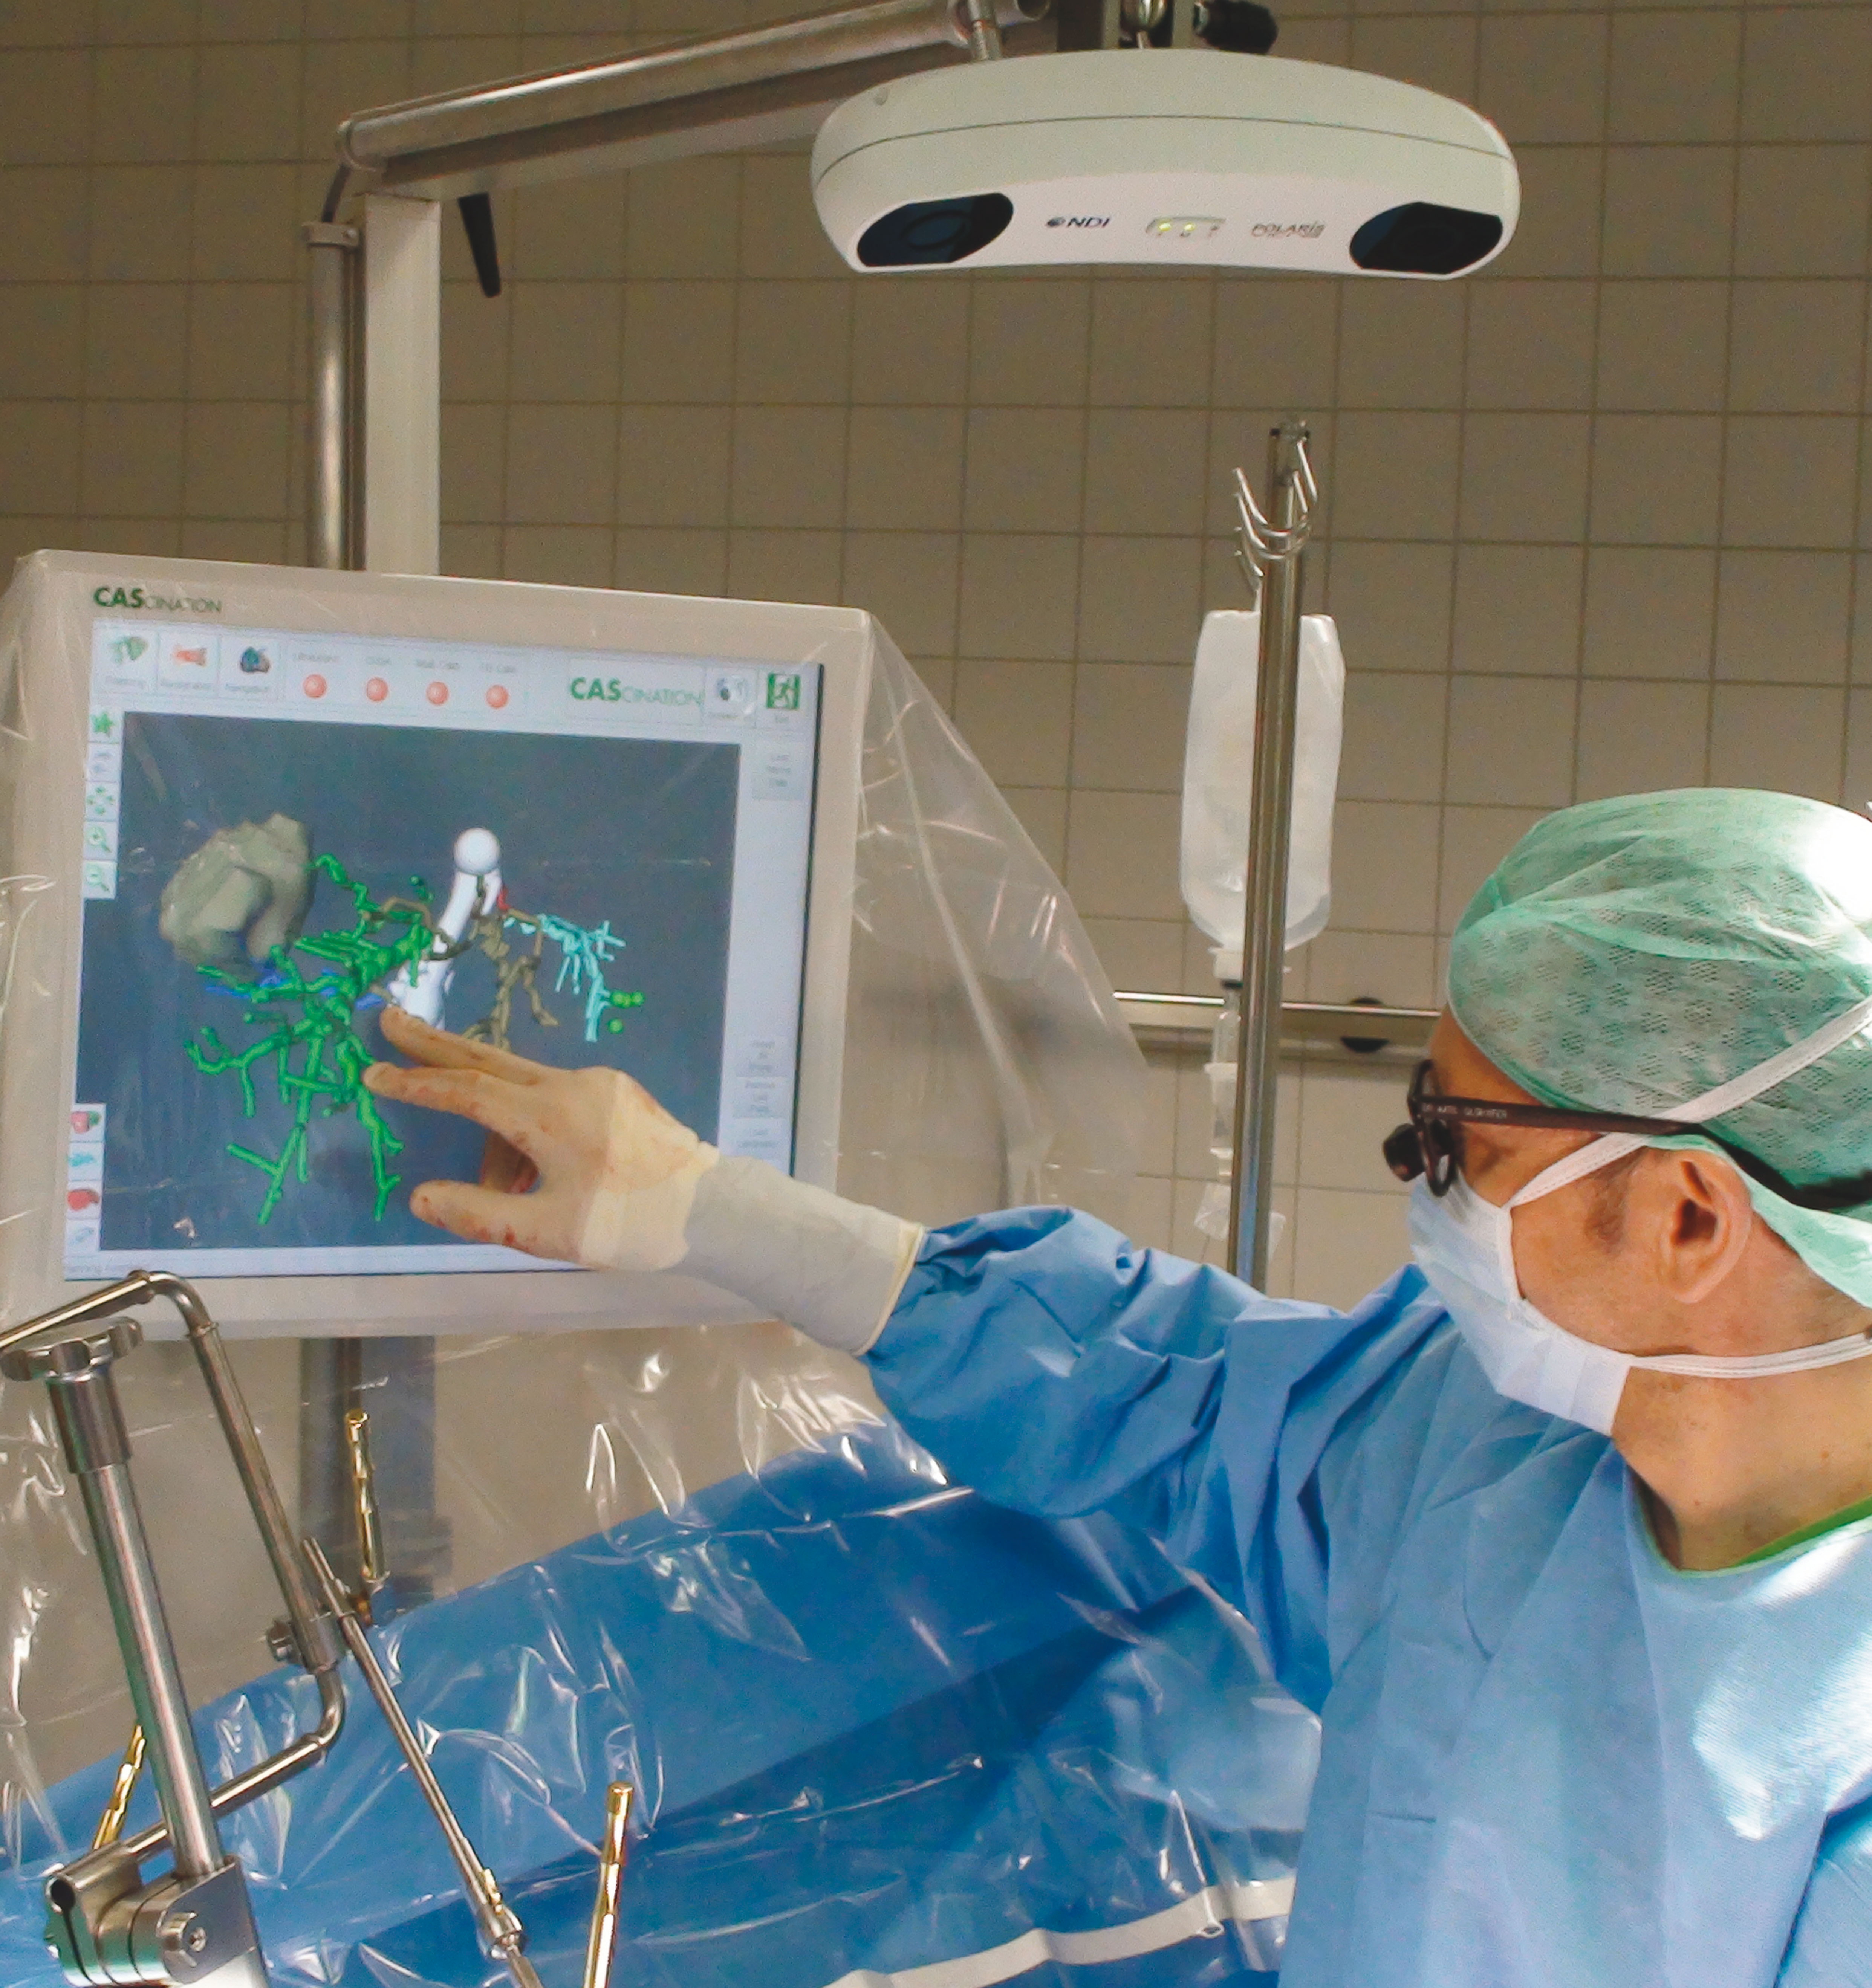 Intraoperative use of liver surgical planning data in the operating room of the Asklepios Clinic, Hamburg-Barmbek.